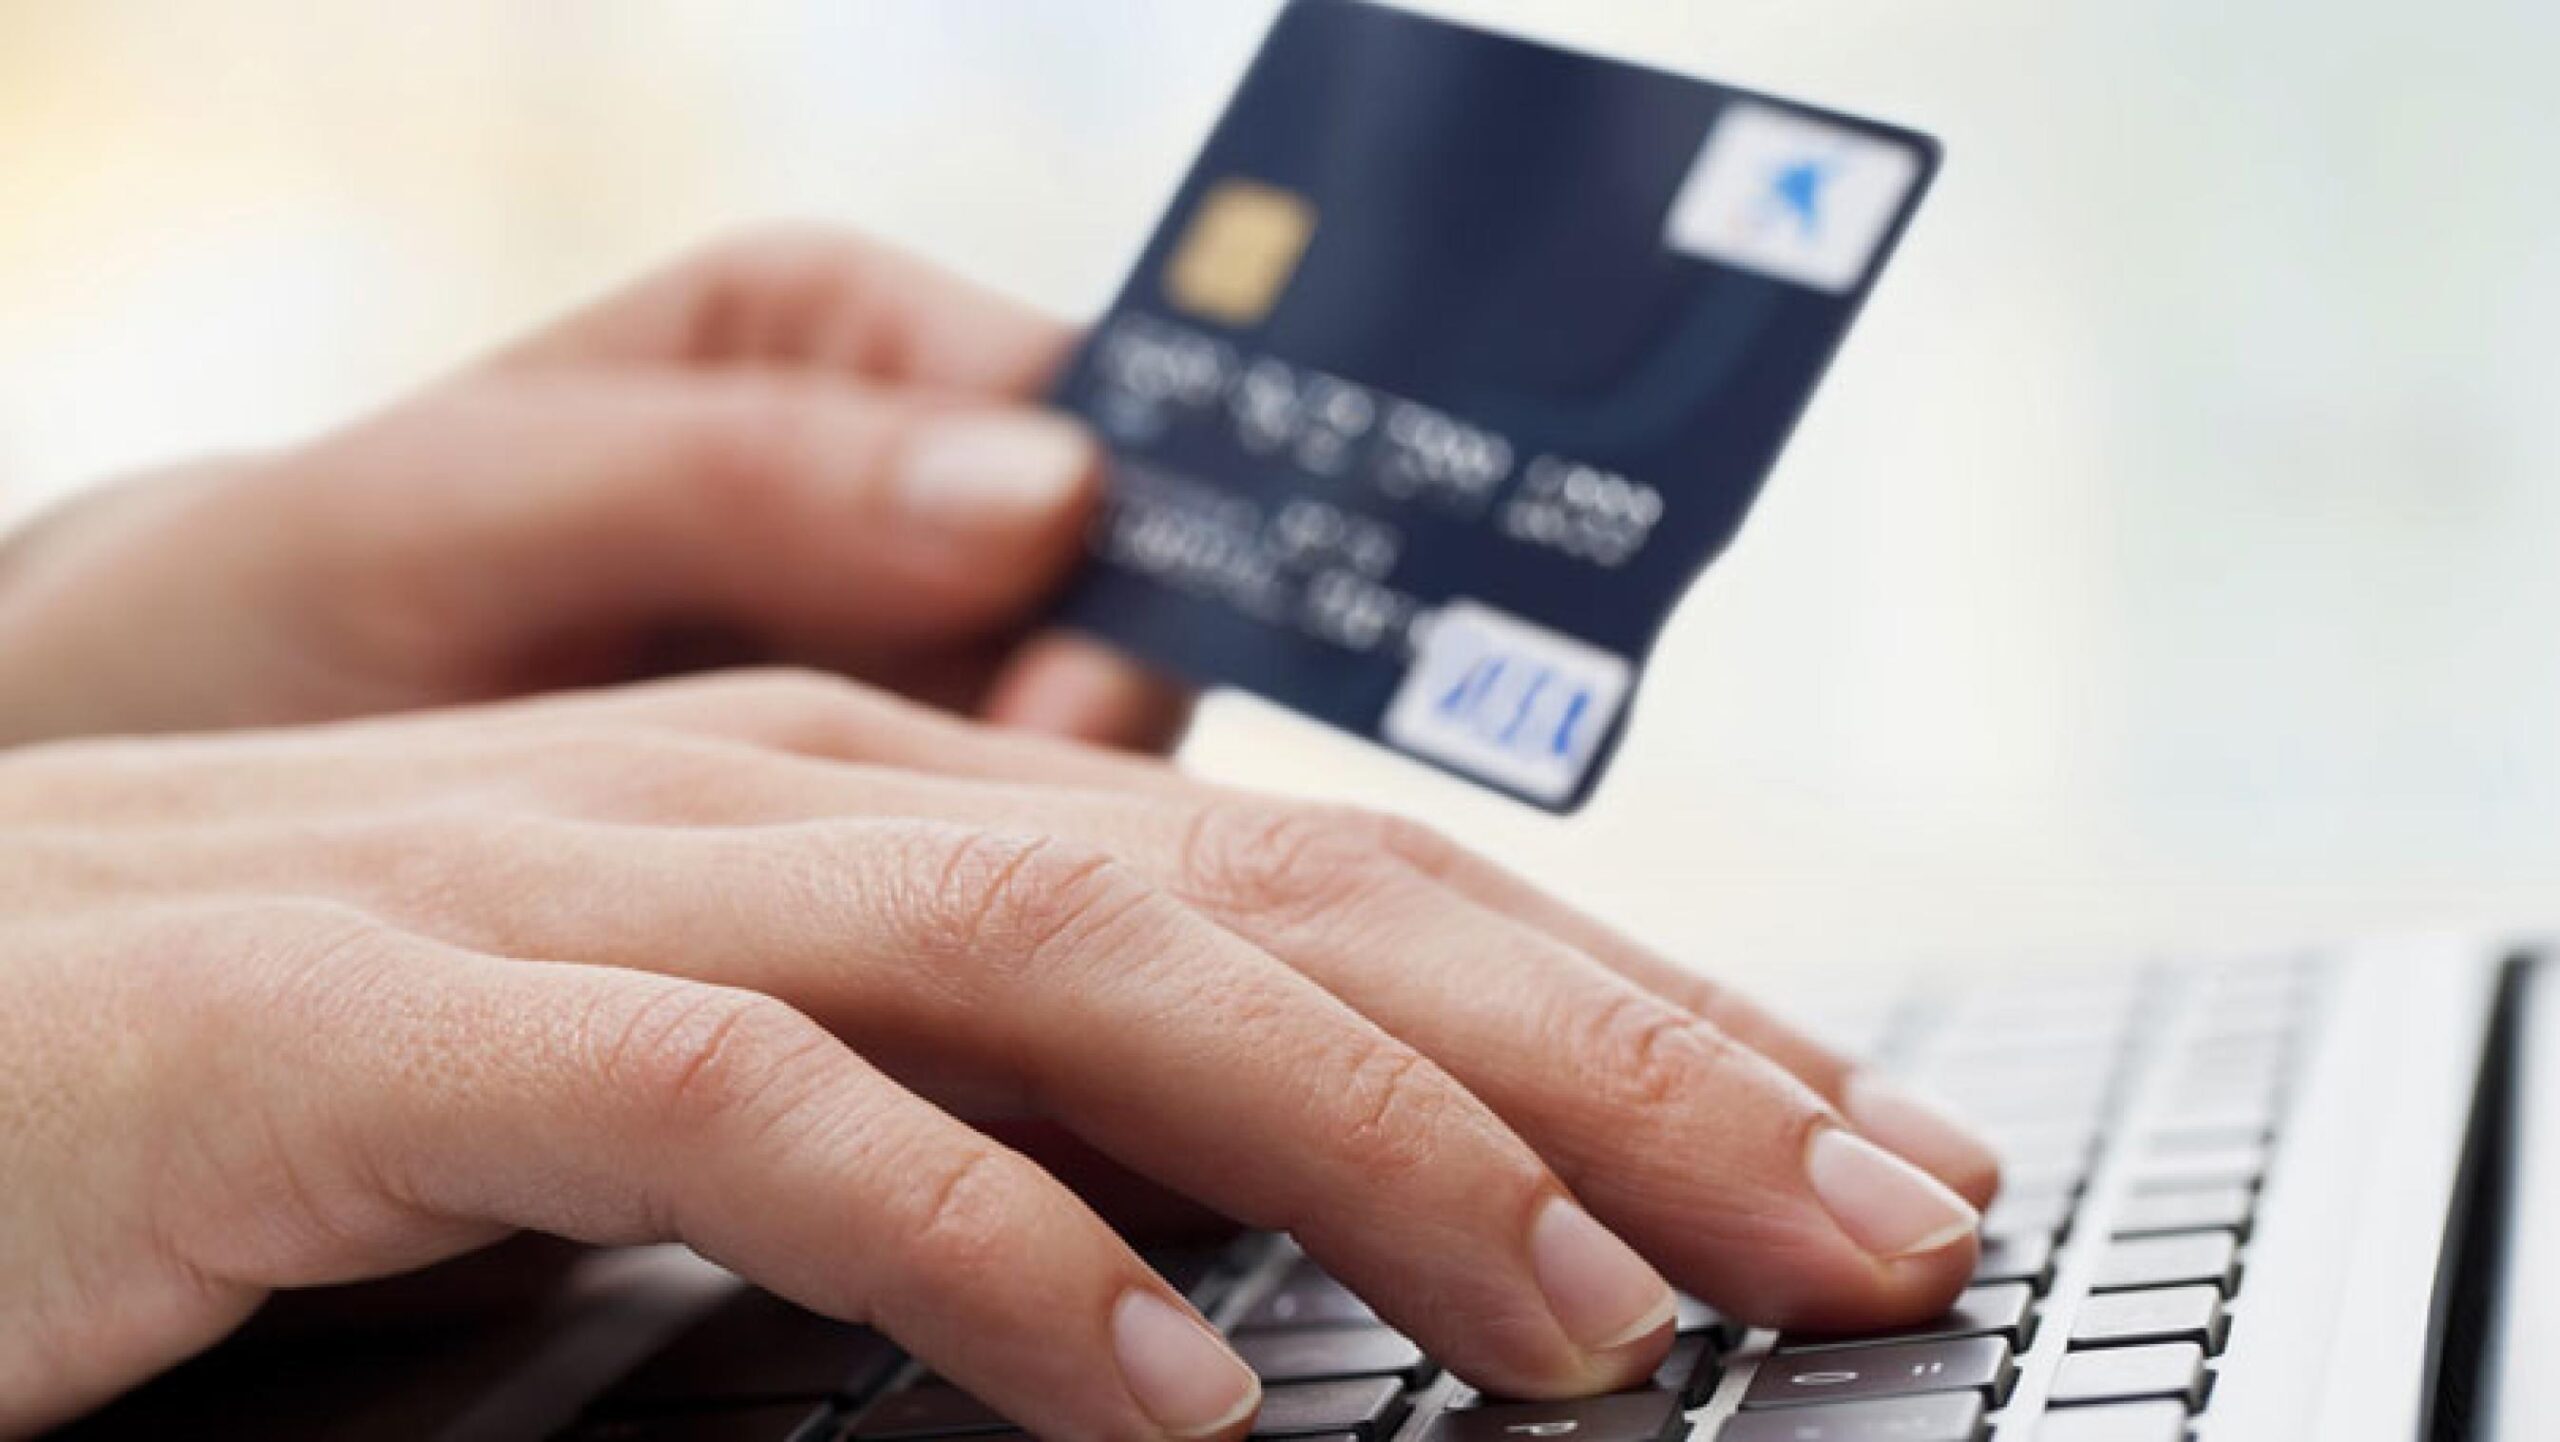 UKGC Ban on Credit Card Transactions Comes as Online Gambling Activity Spikes